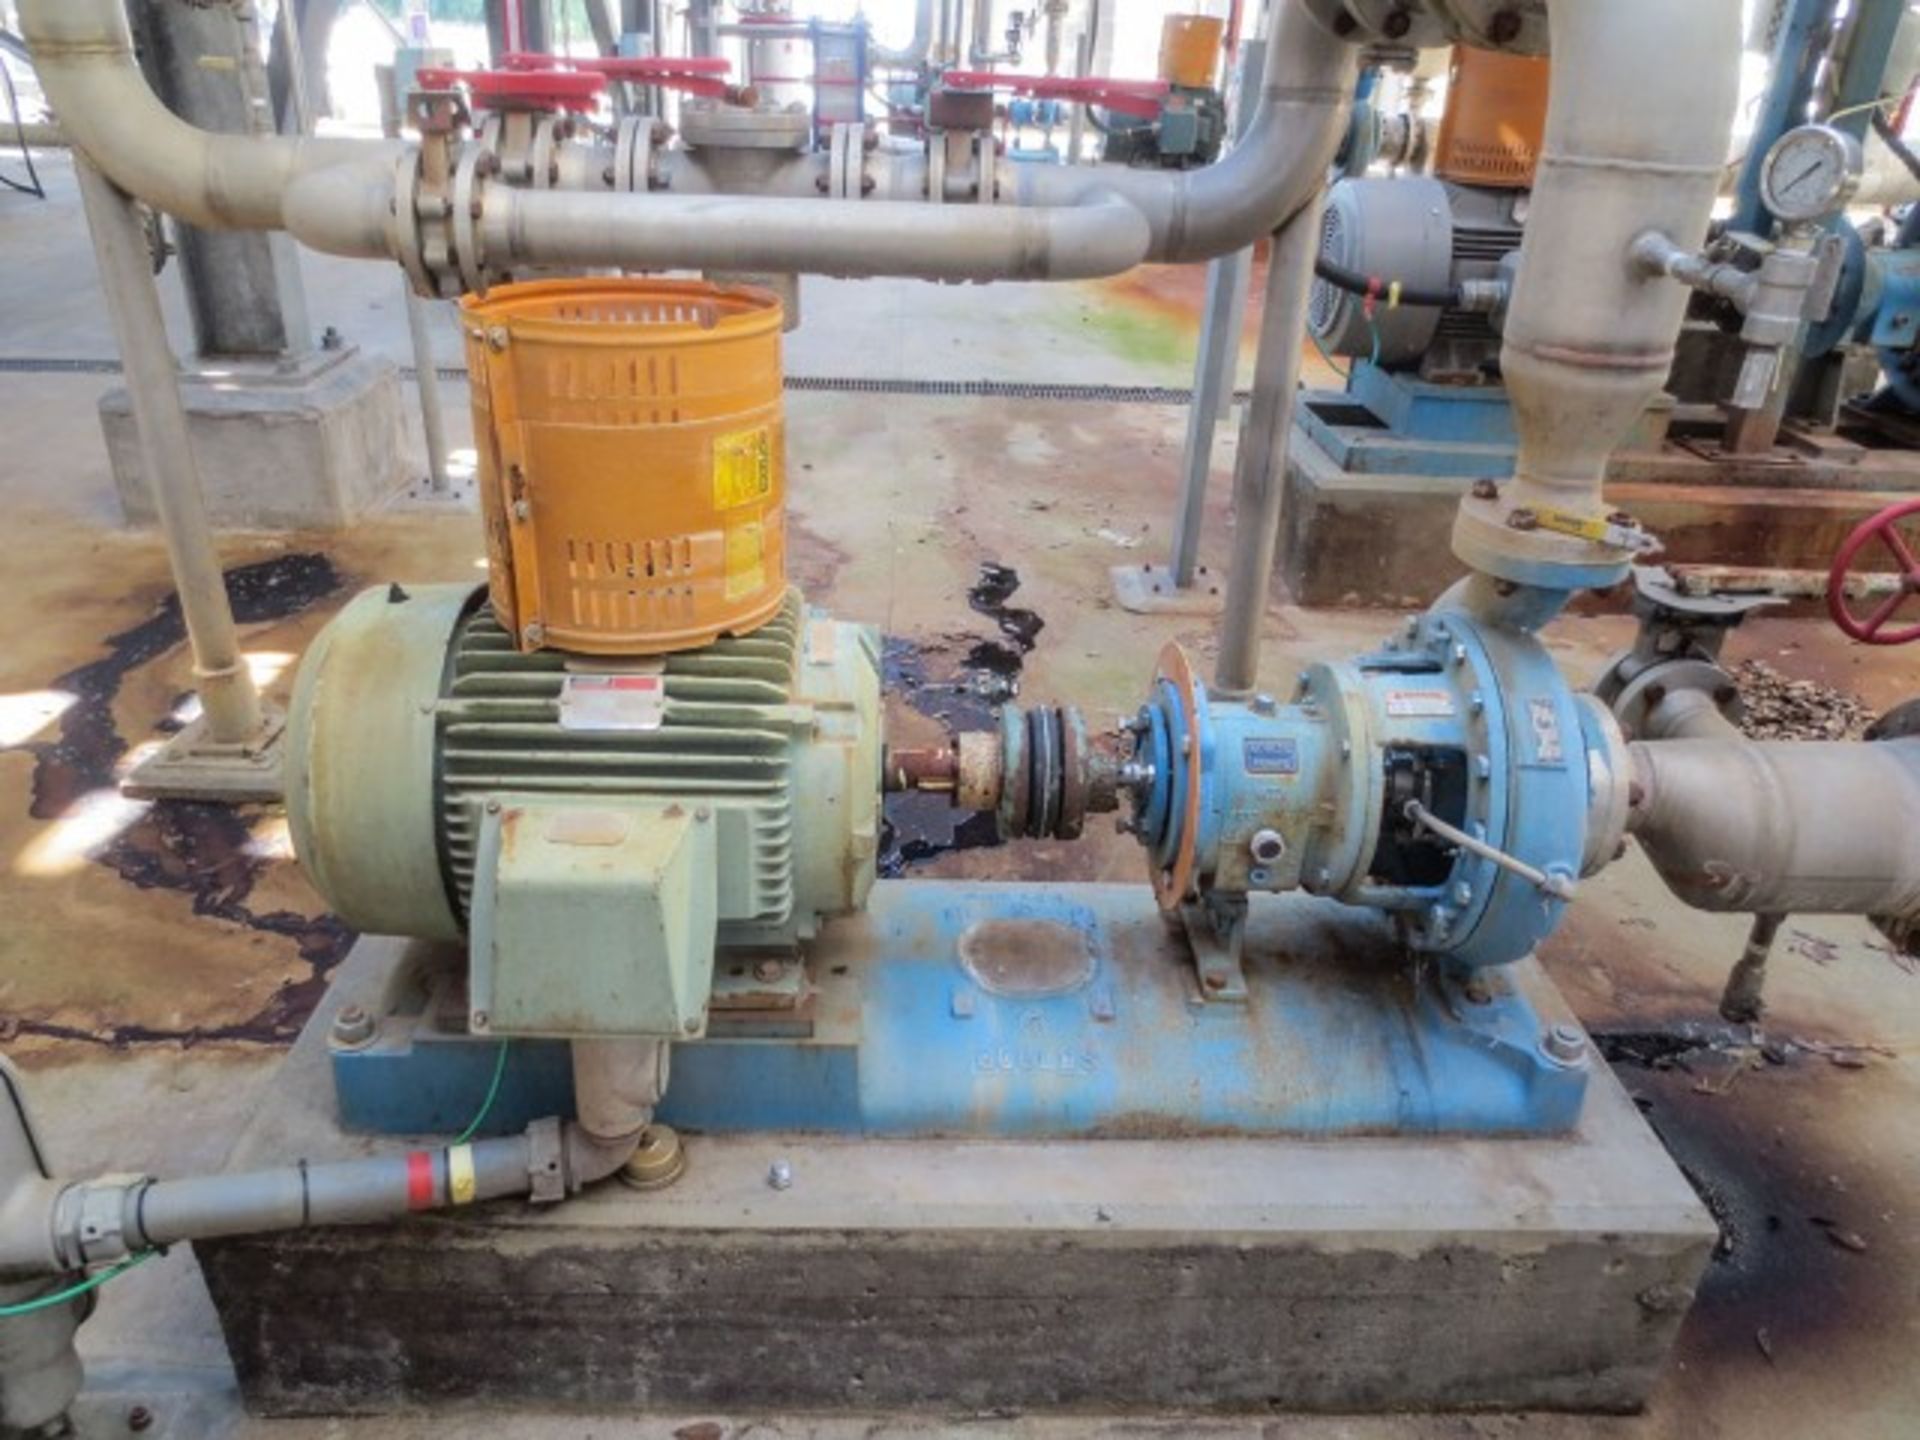 Goulds centrifugal pump, model 3196 MTX. Stainless steel 316. Size 3X4- Rigging/Loading Fee: $850